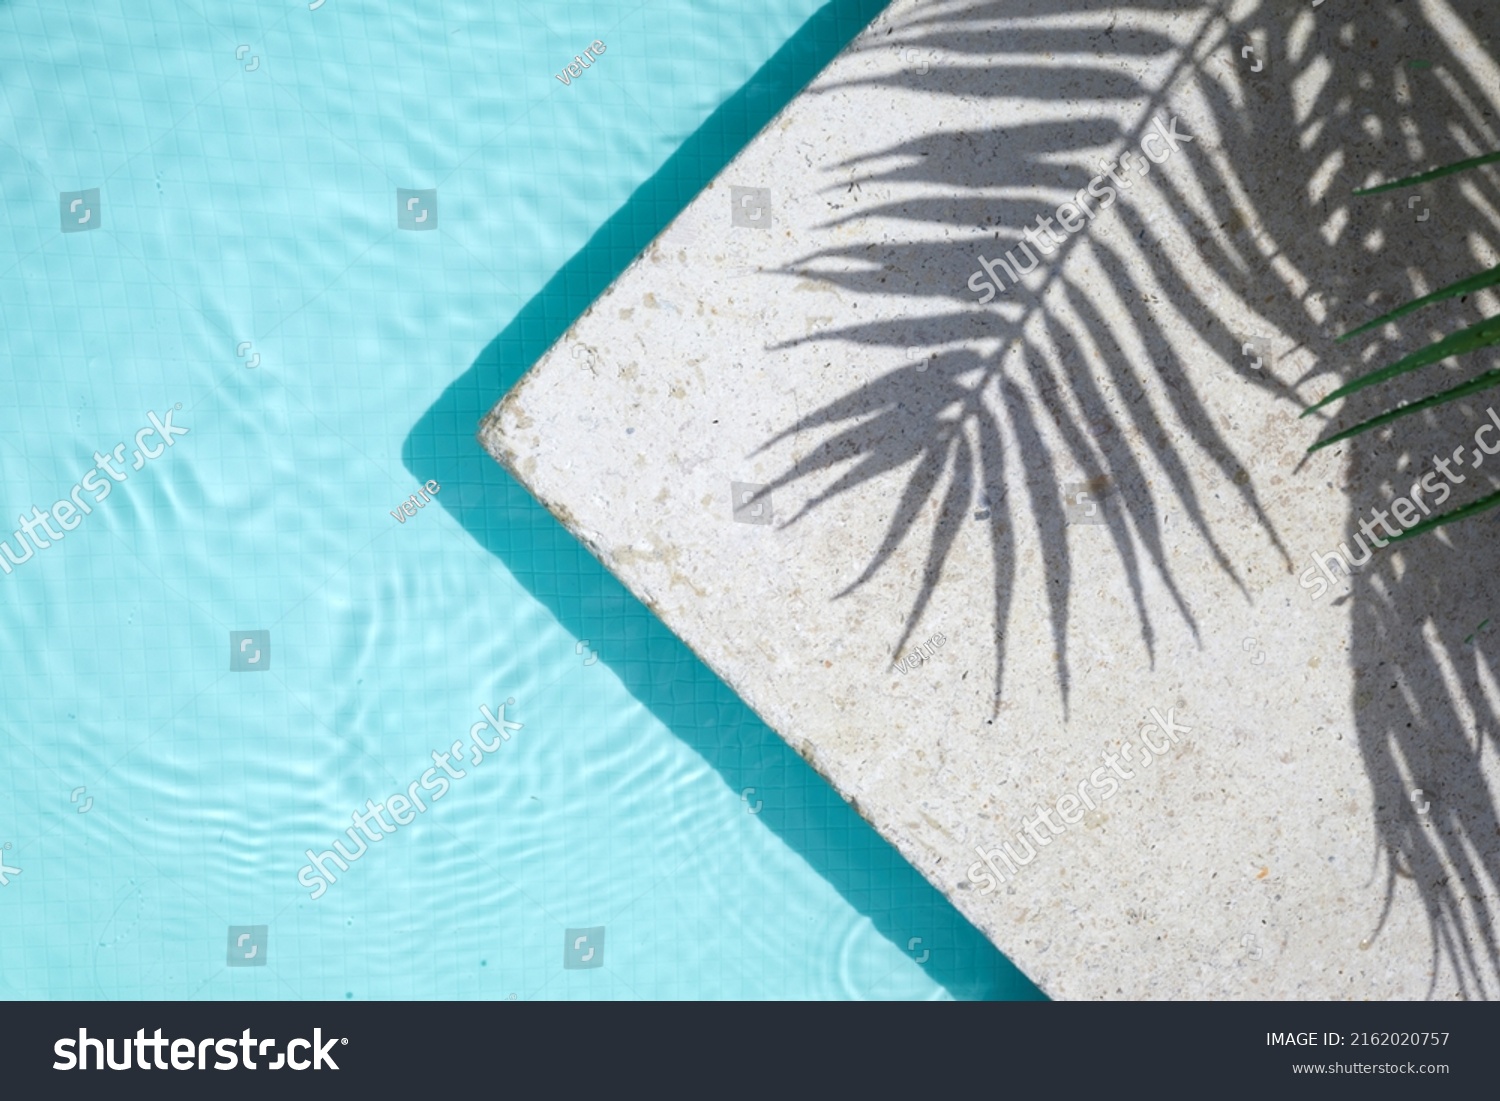 Swimming pool top view background. Water ring and palm shadow on travertine stone #2162020757